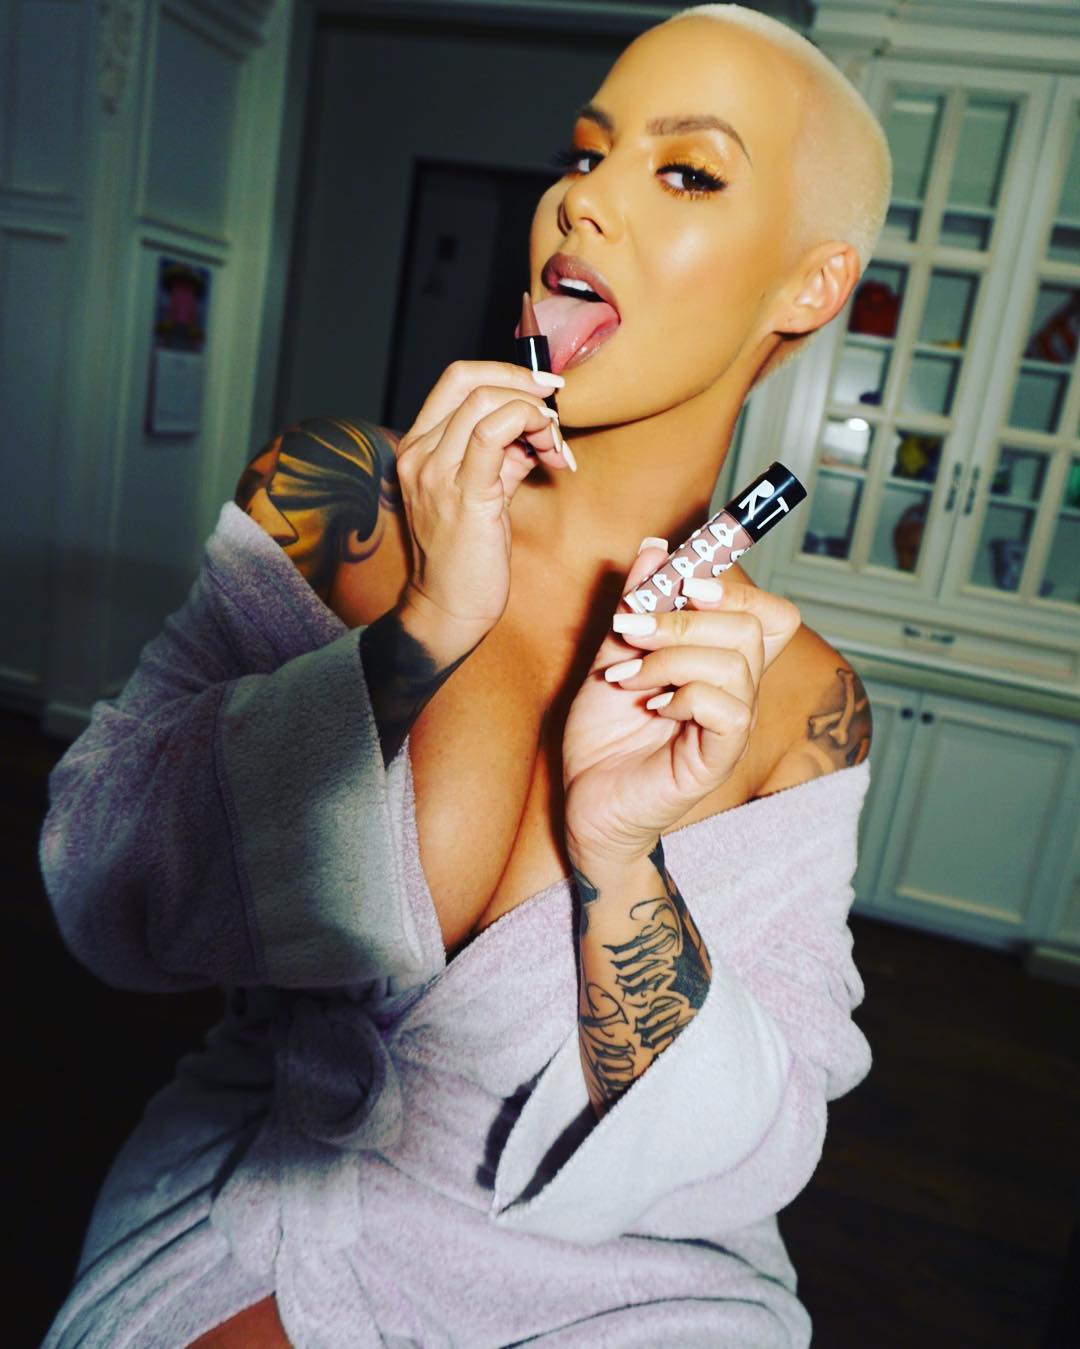 Amber Rose posts raunchy photos after claiming she's had 'no time for pussies